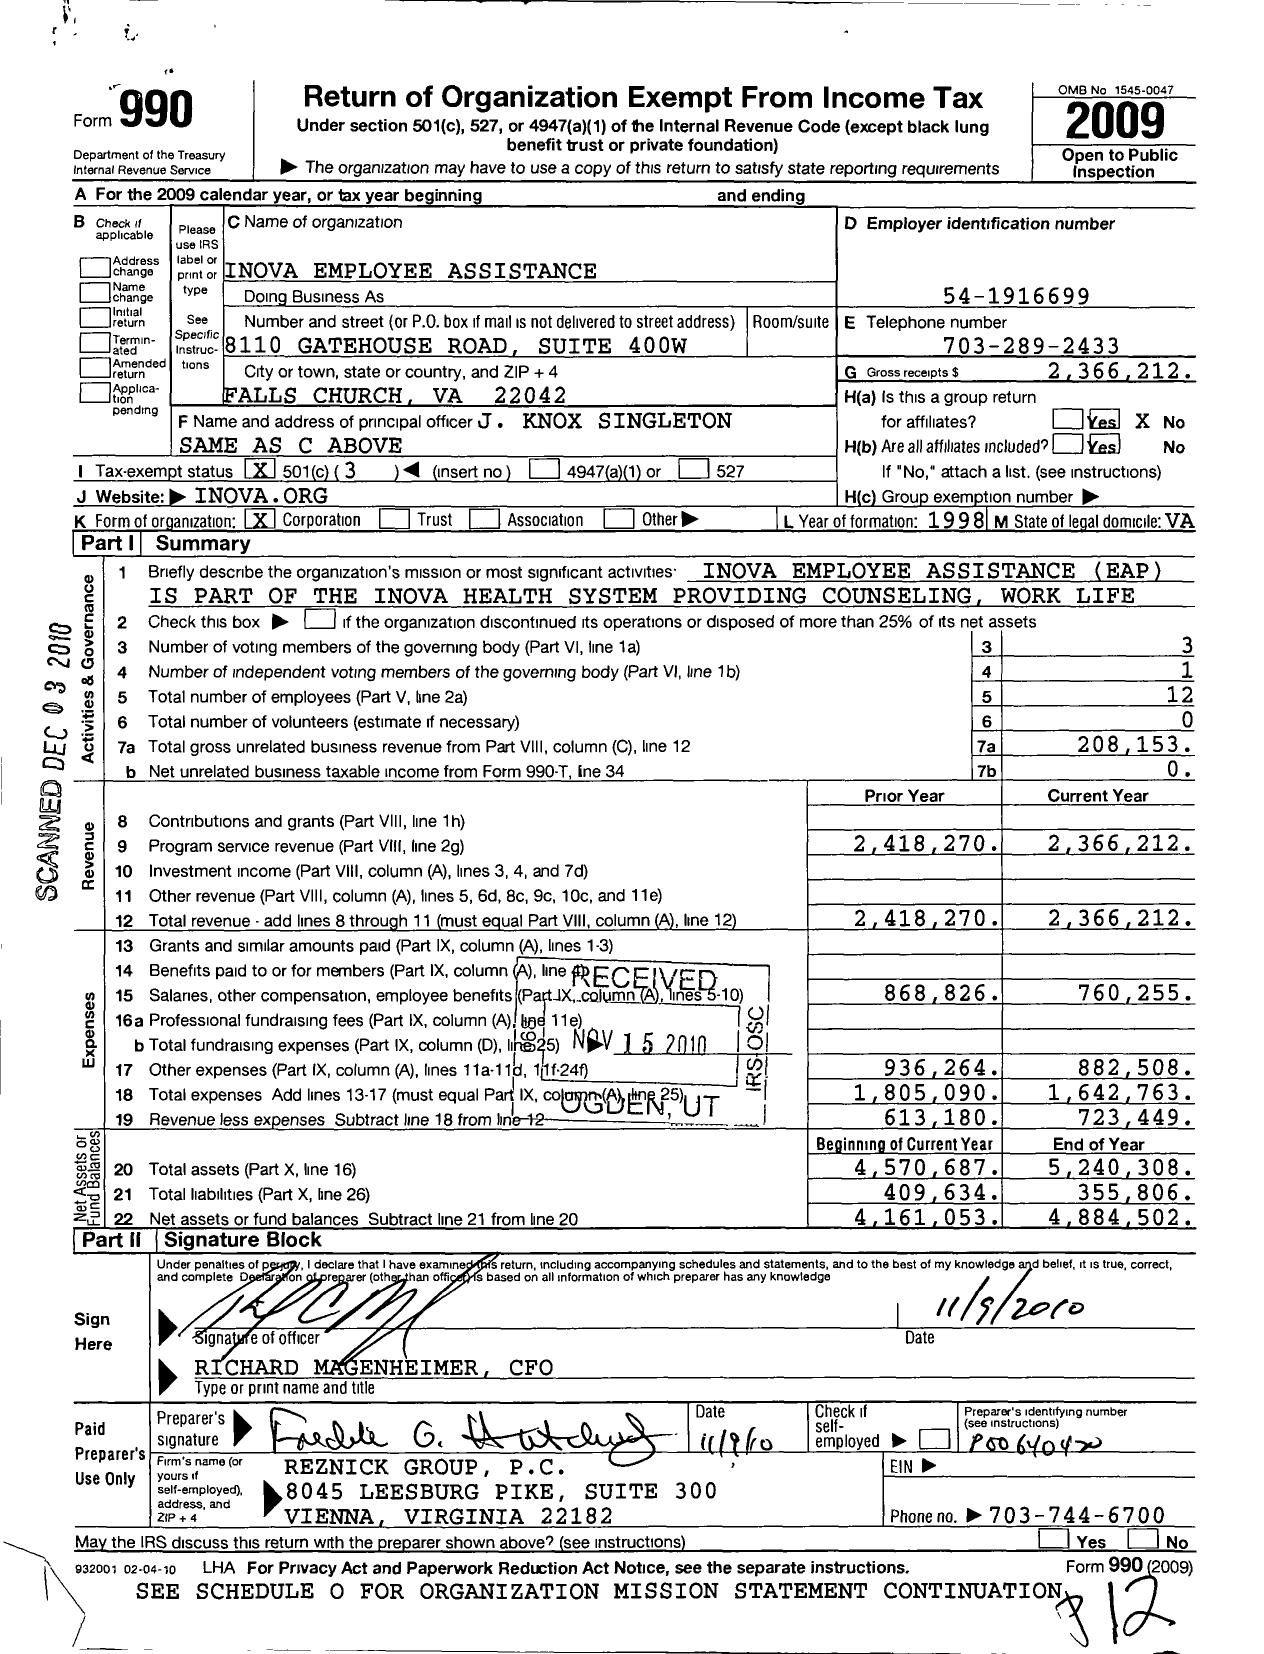 Image of first page of 2009 Form 990 for Inova Employee Assistance (IEA)